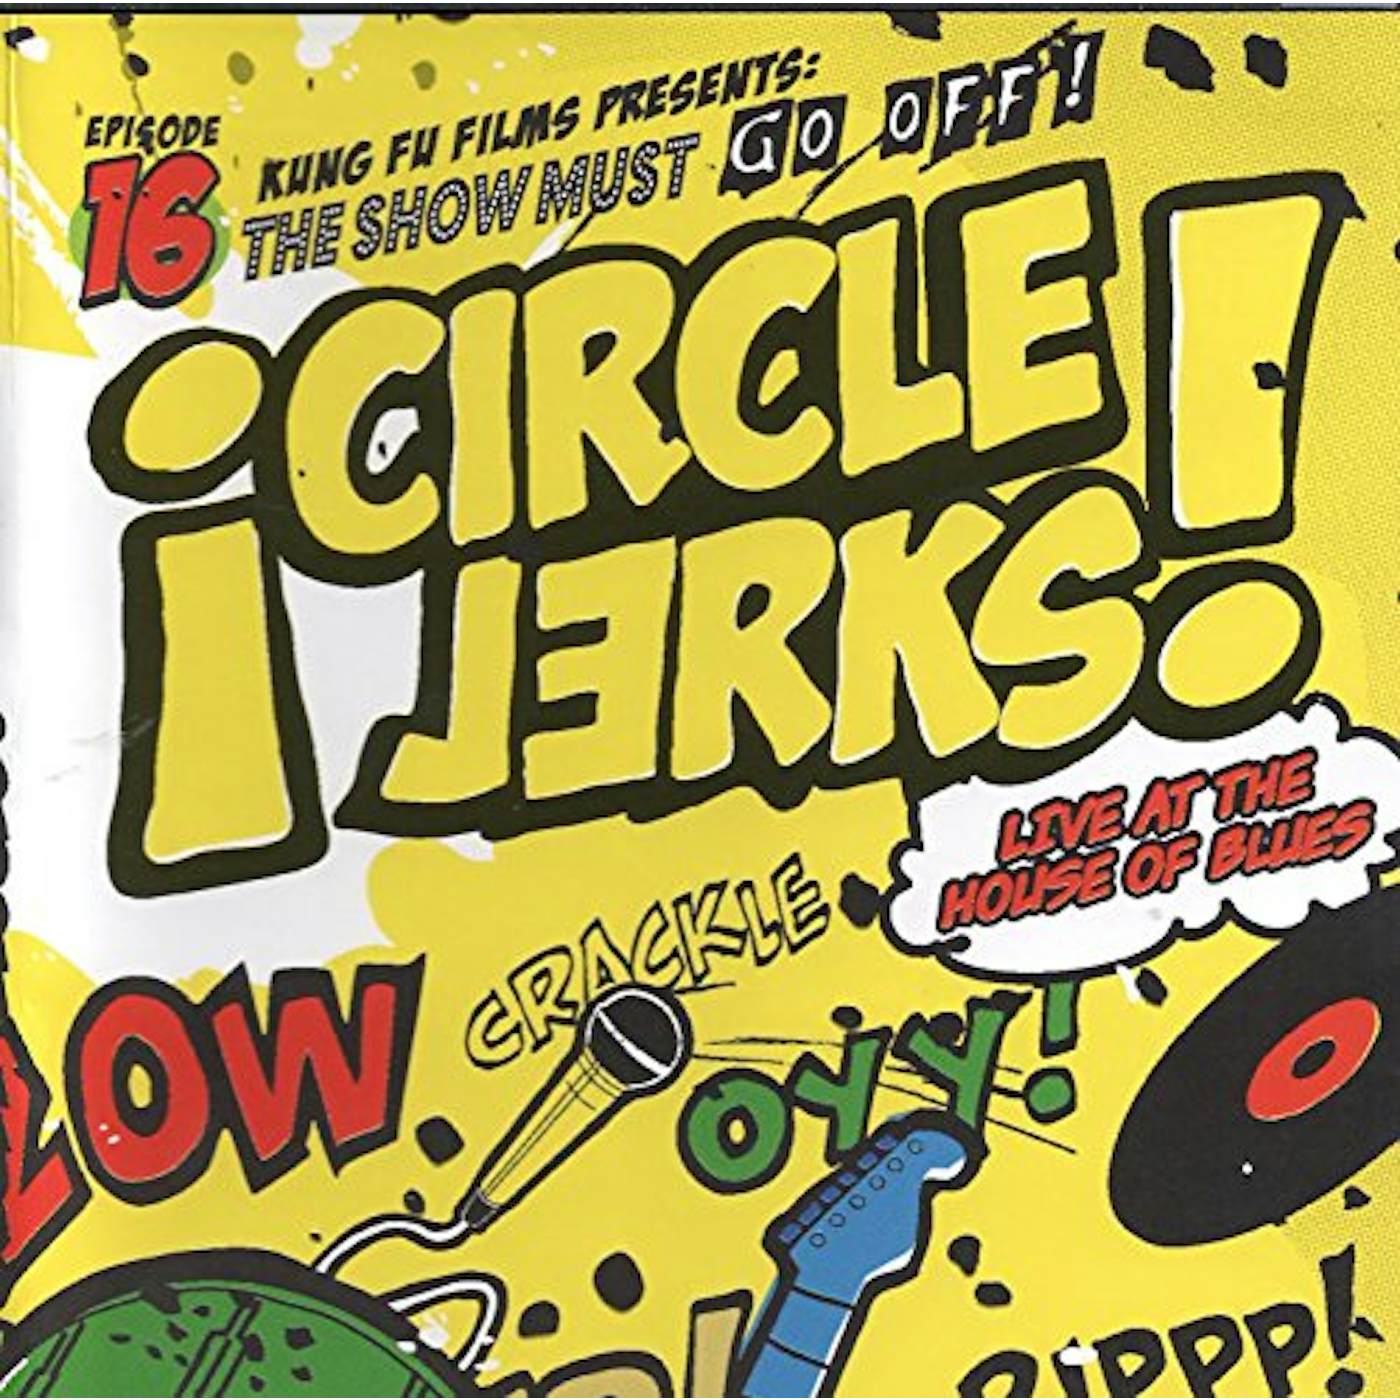 Circle Jerks Live at the House of Blues Vinyl Record